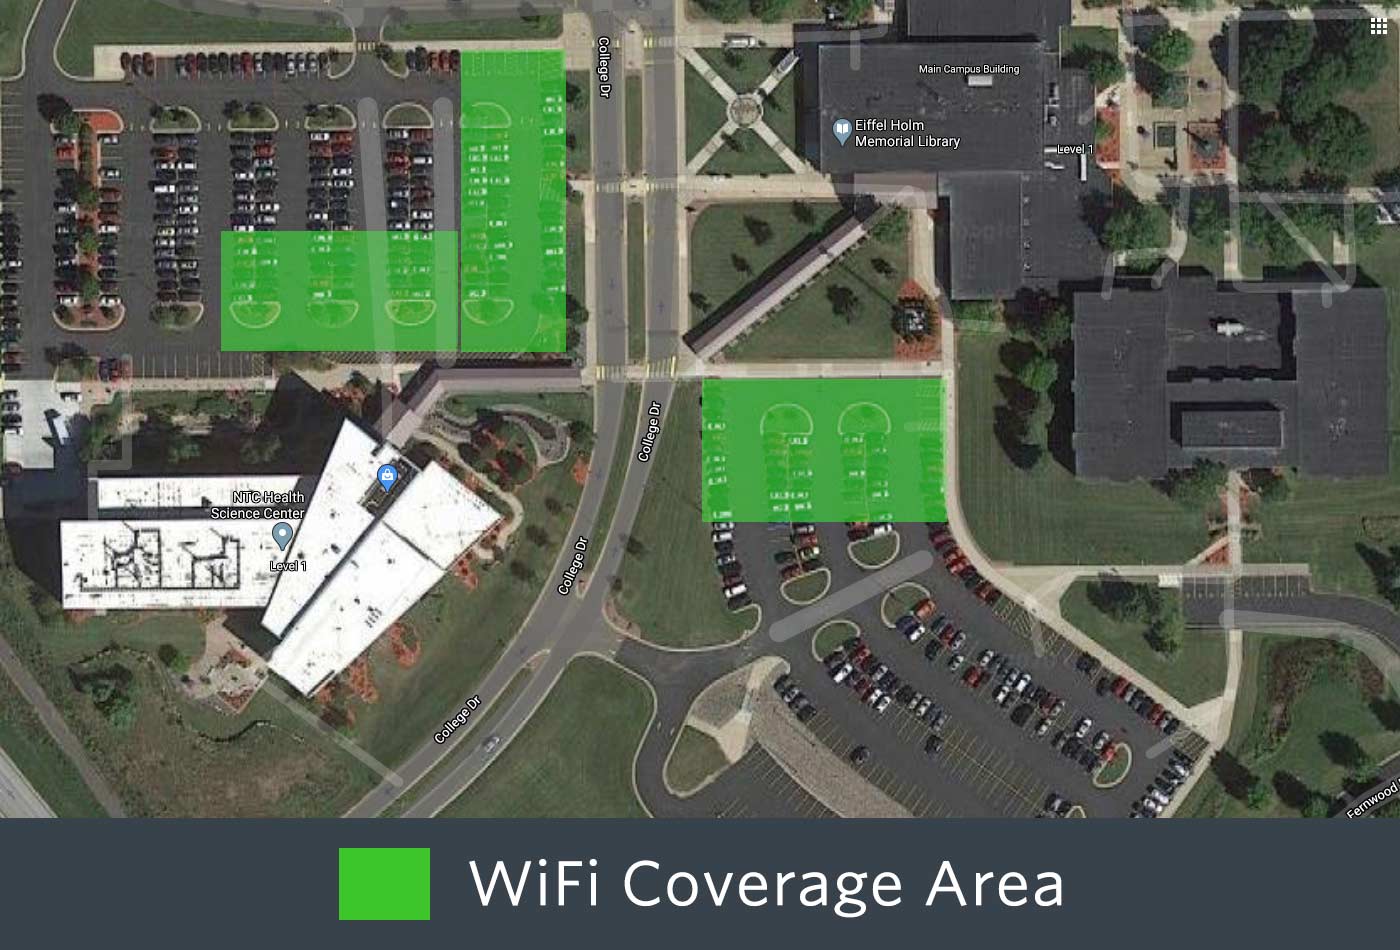 Outdoor WiFi coverage of the front of the Wausau Campus